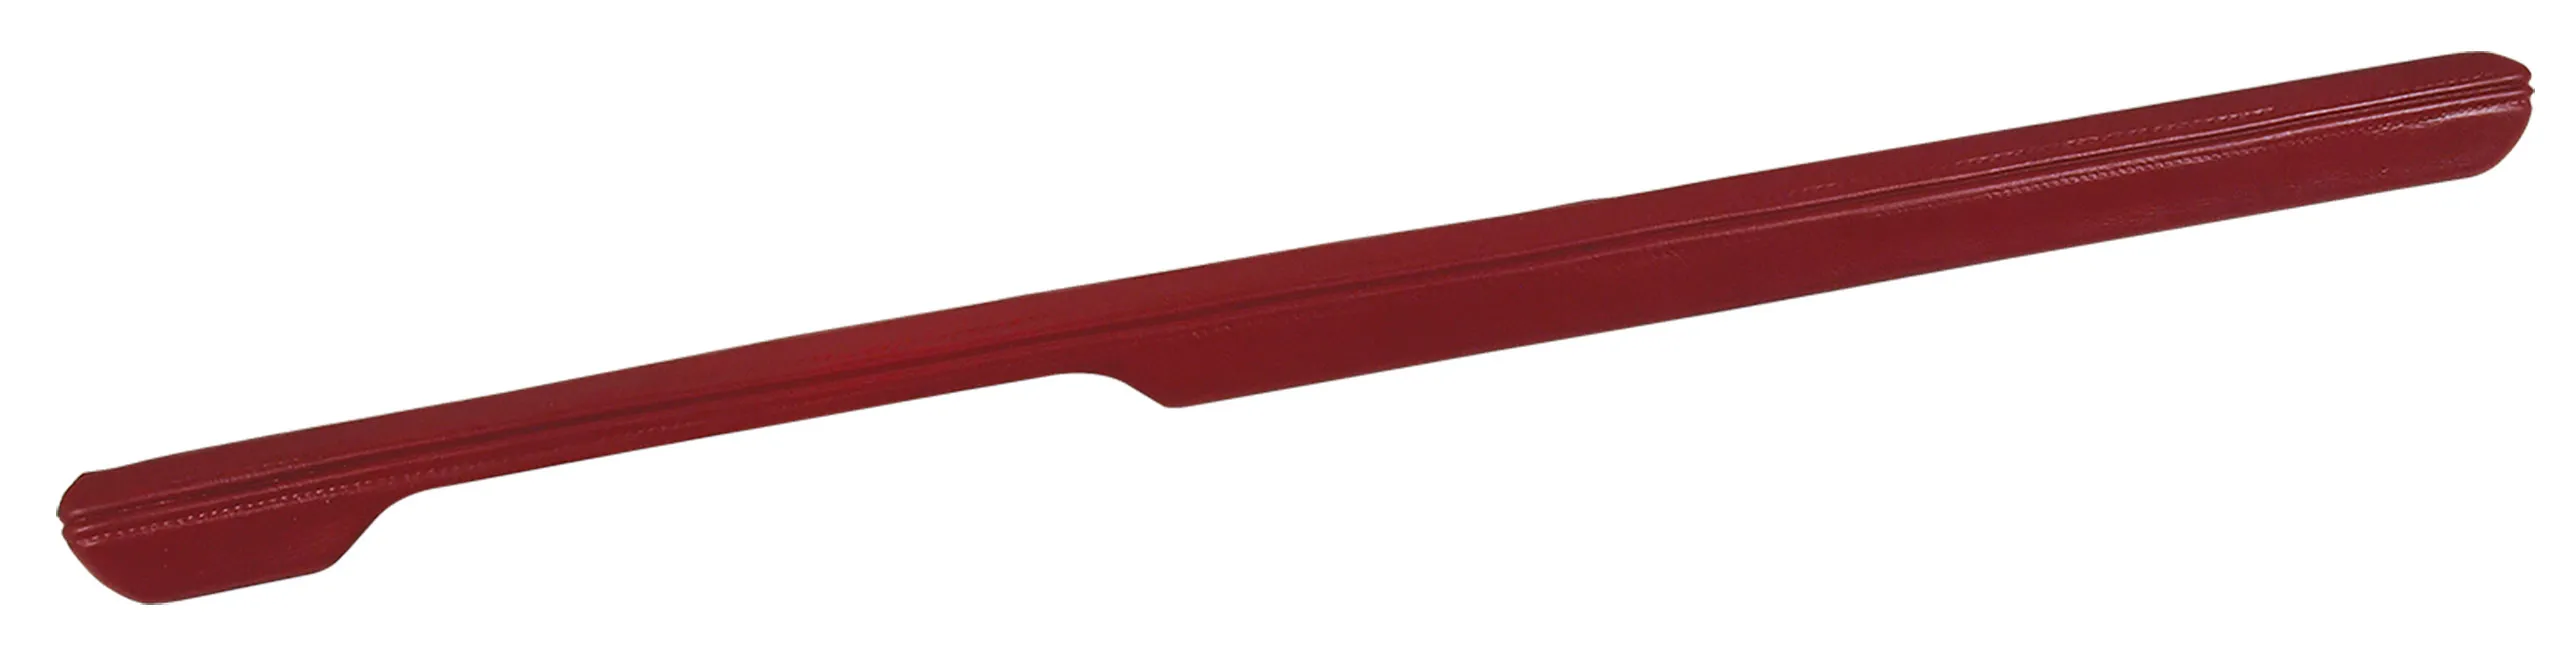 First Generation 1967-1968 Ford Mustang Lower Dash Pad - Red - Reproduction - CA